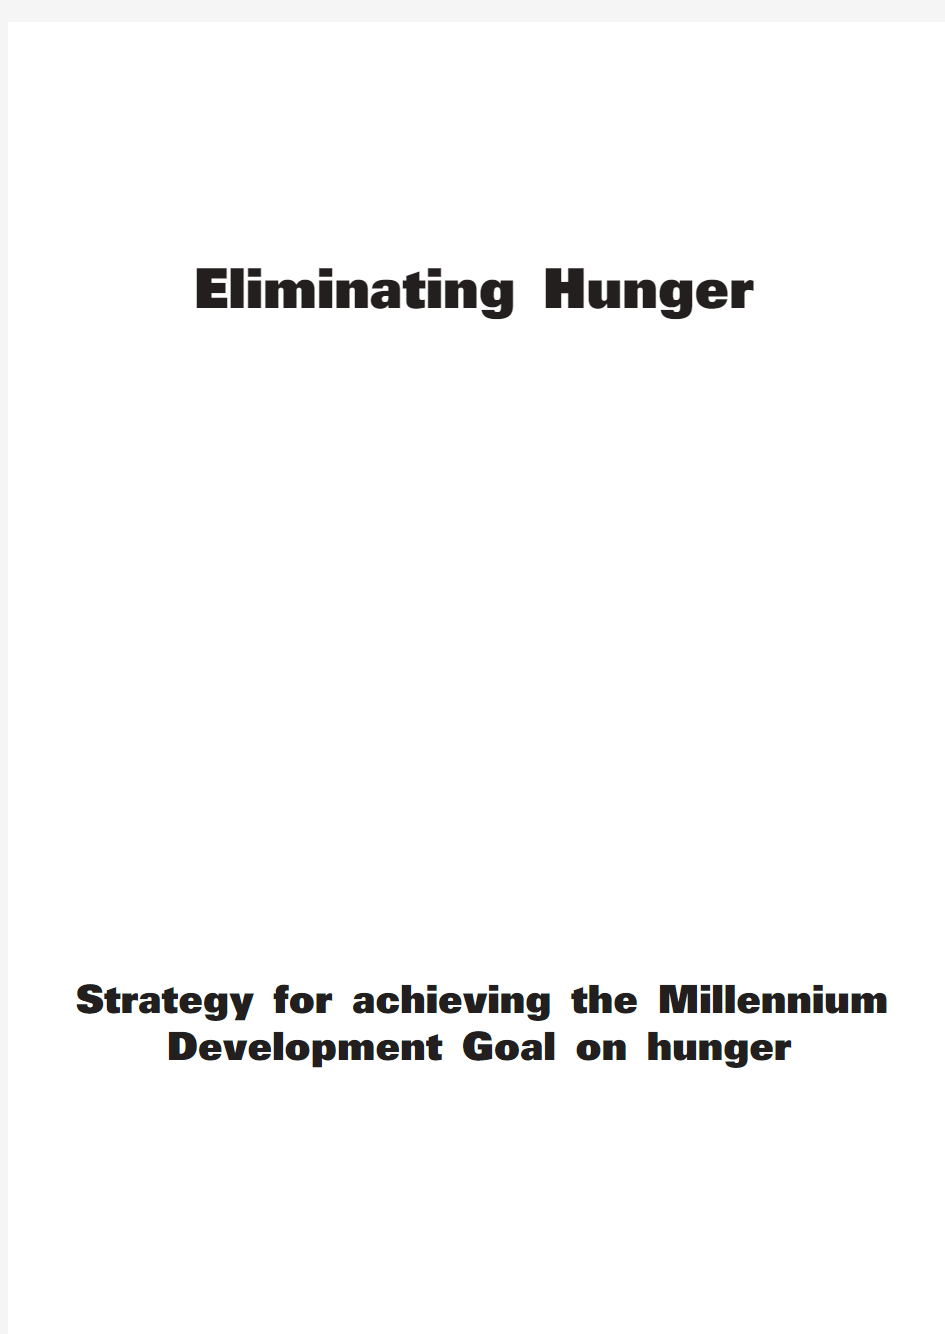 Eliminating Hunger Strategy for achieving the Millennium Development Goal on hunger